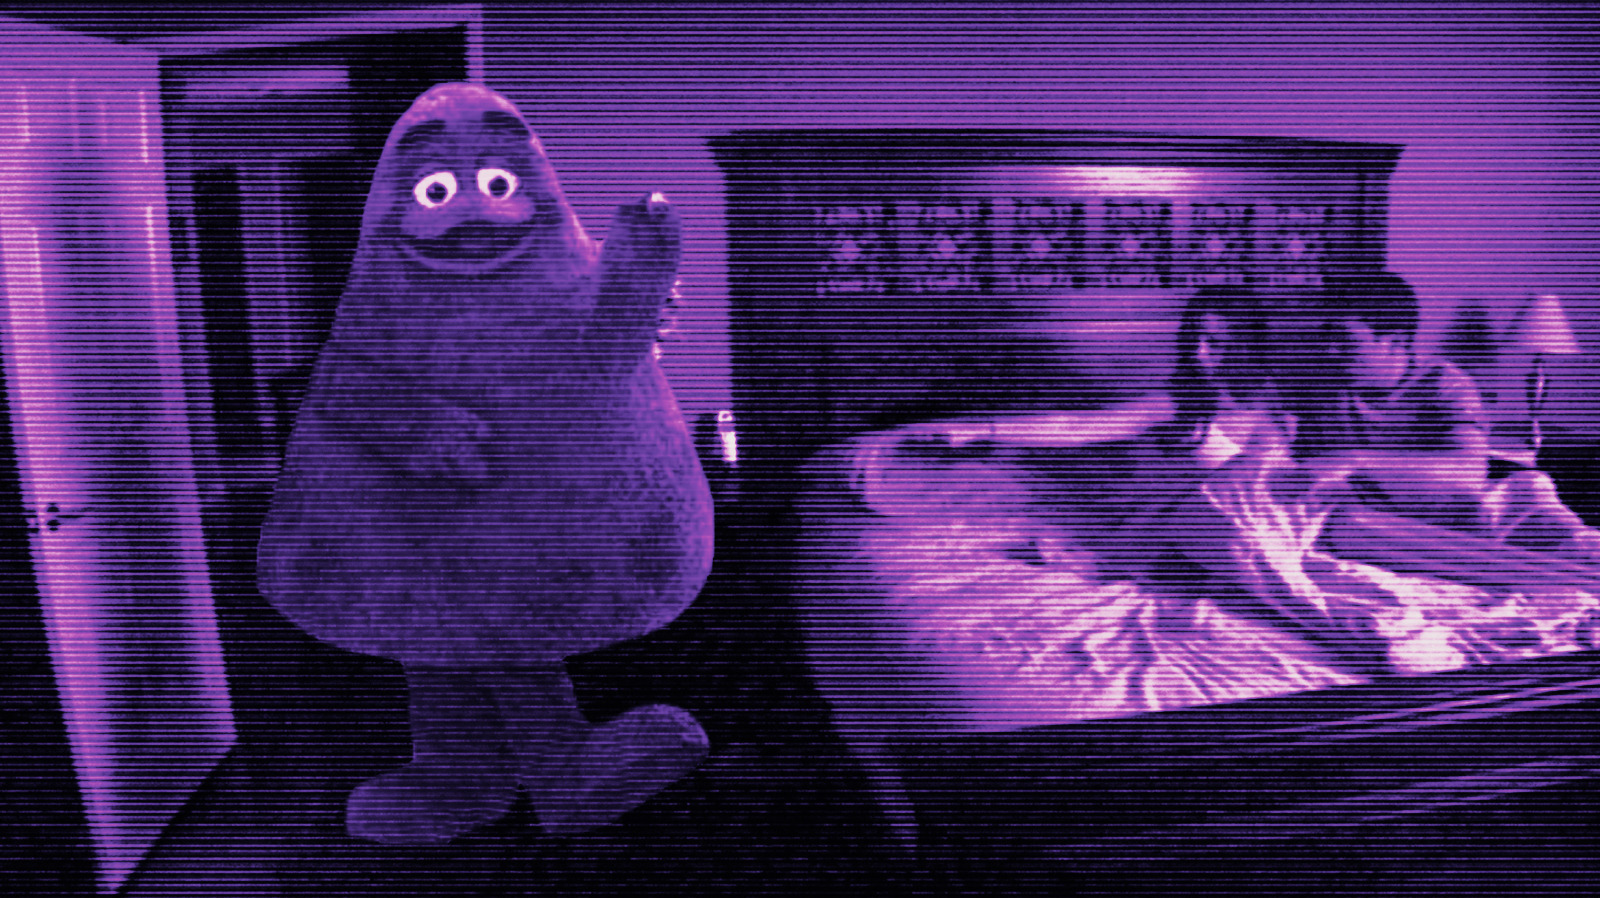 Move over, paranormal activity – Grimace is our new horror god